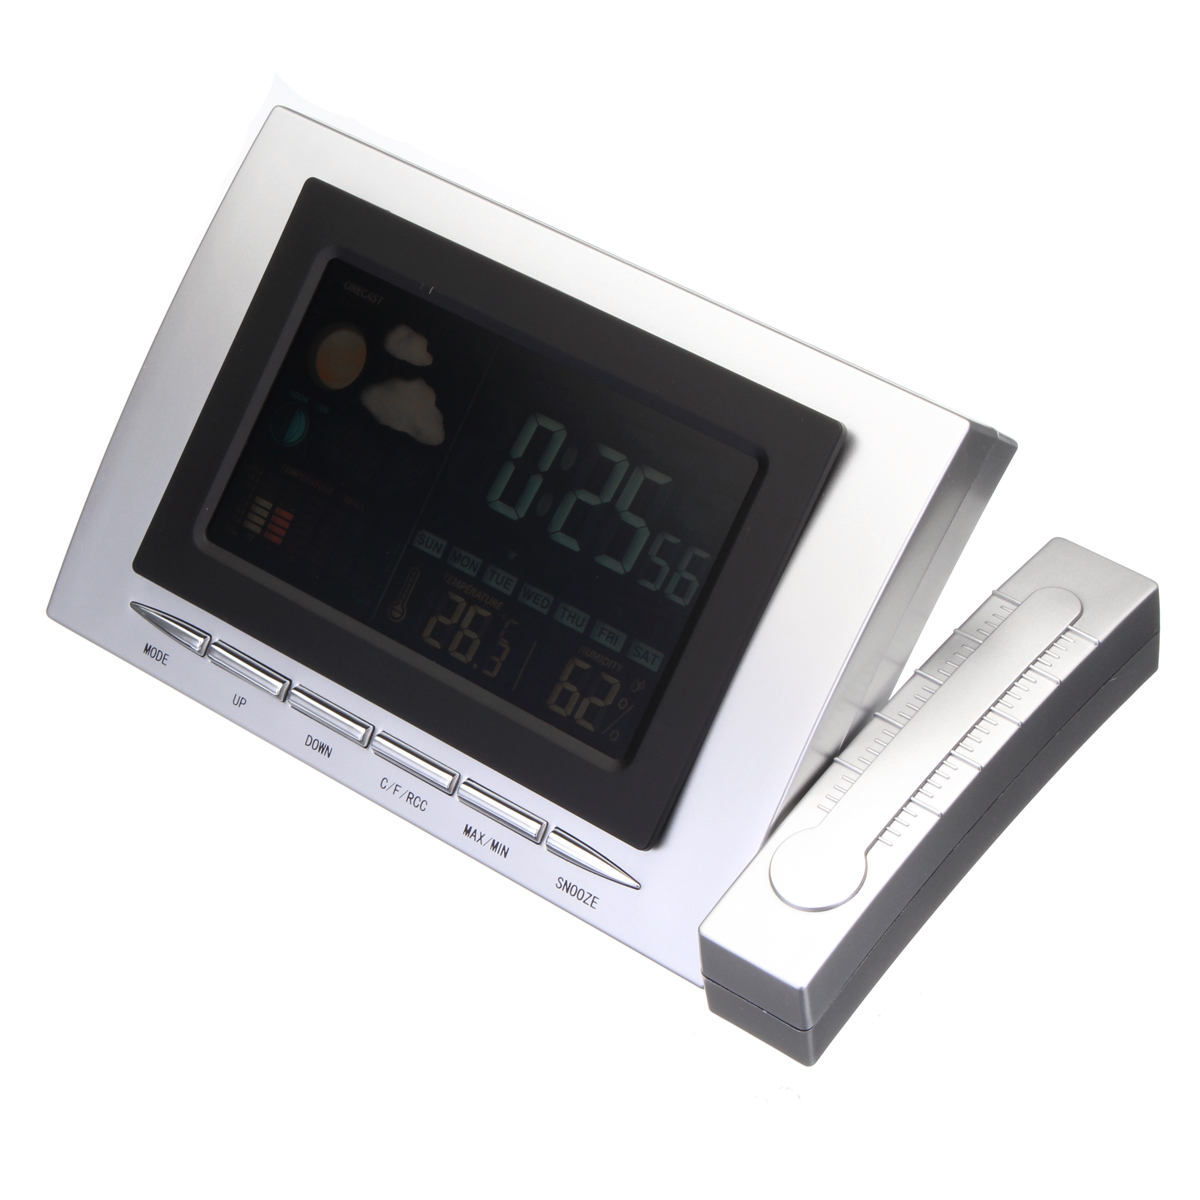 Classic-Weather-Station-Alarm-Clock-Color-Screen-Backlight-Temperature-Display-1158053-4